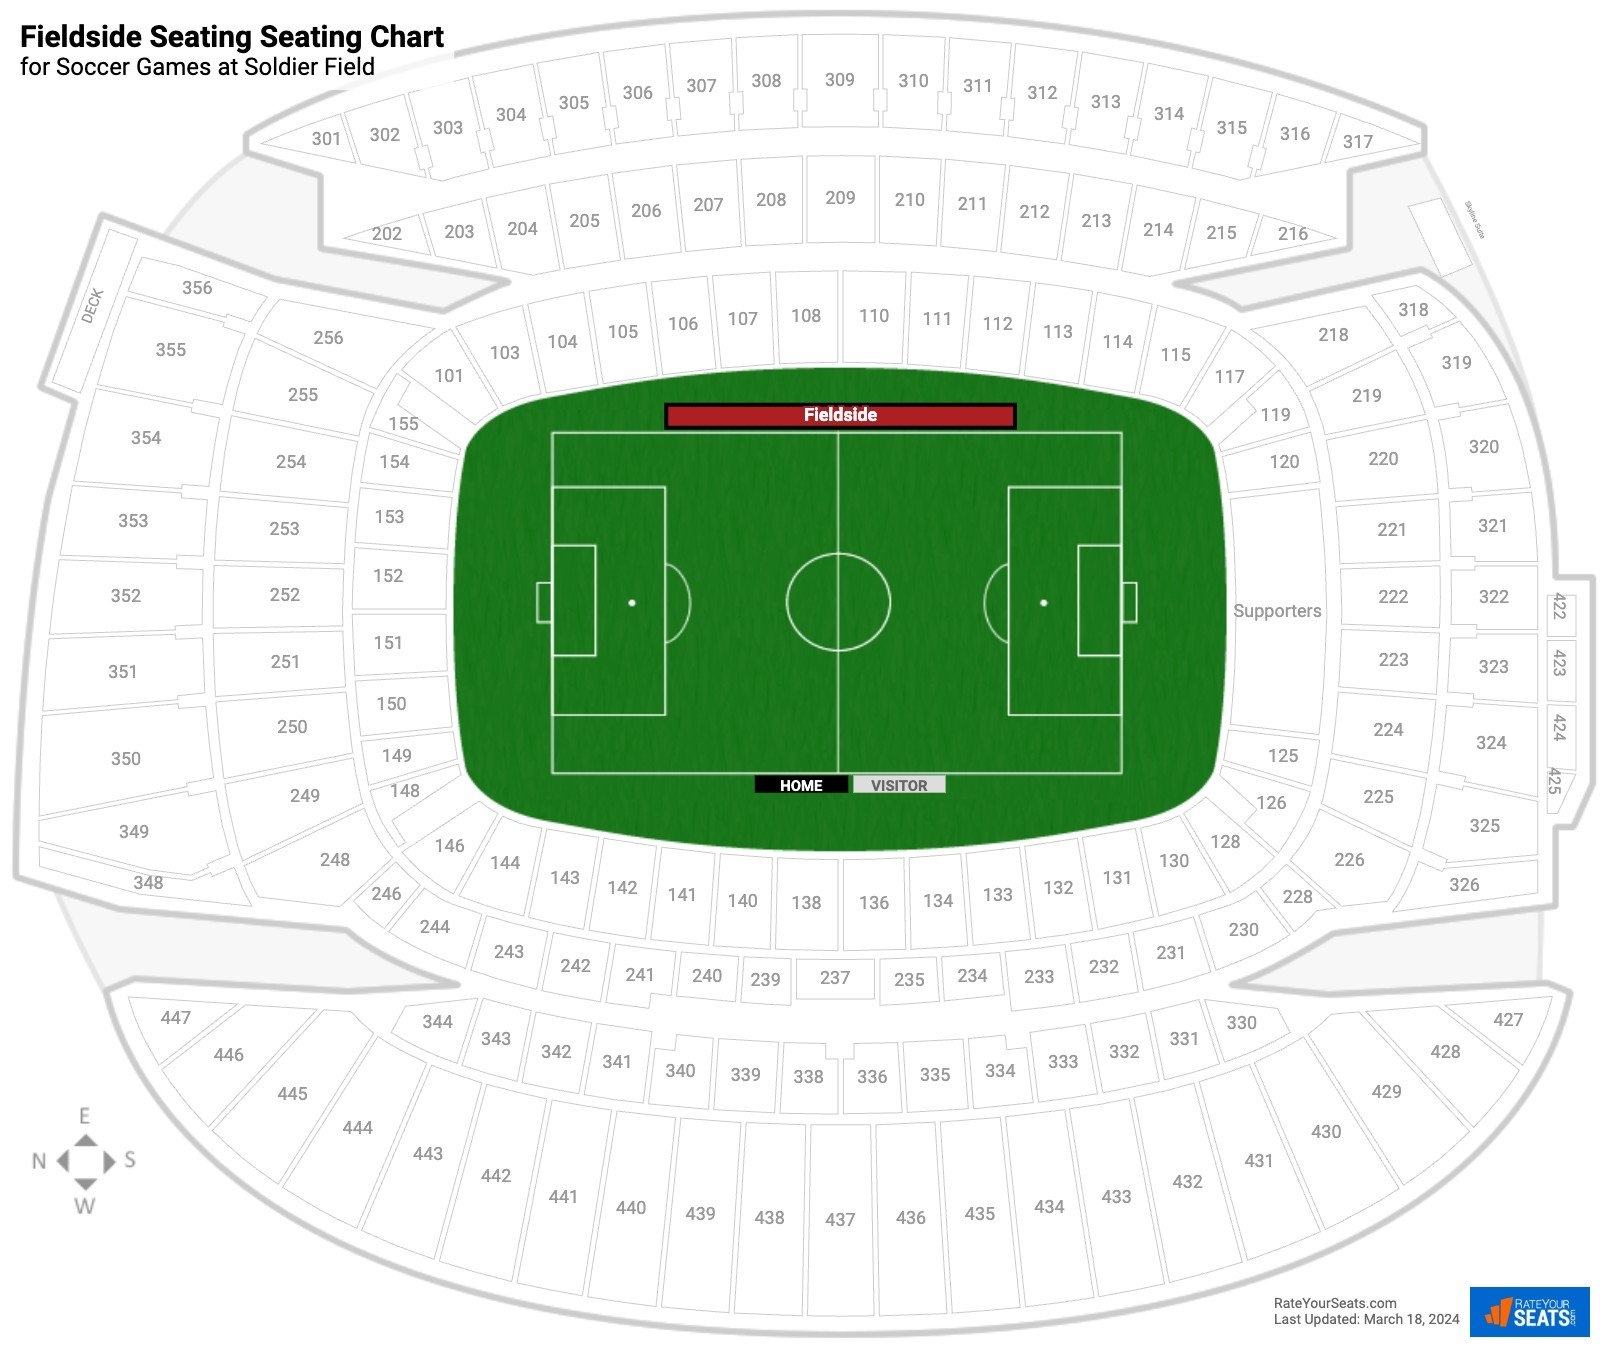 Soccer Fieldside Seating Seating Chart at Soldier Field